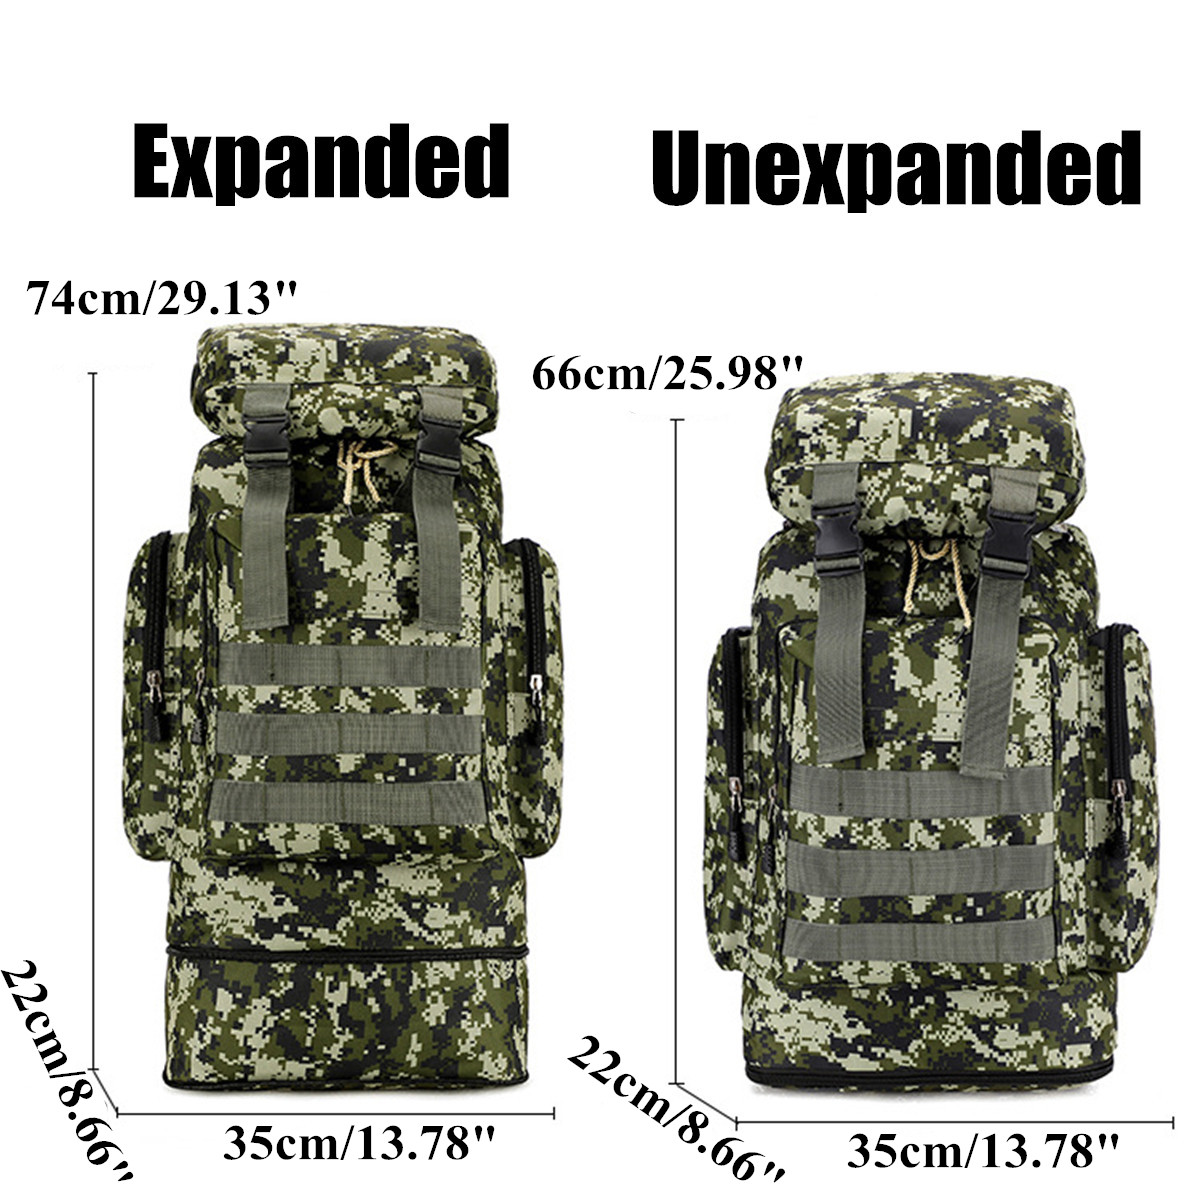 80L-Multi-Color-Large-Capacity-Waterproof-Tactical-Backpack-Outdoor-Travel-Hiking-Camping-Bag-1650714-9